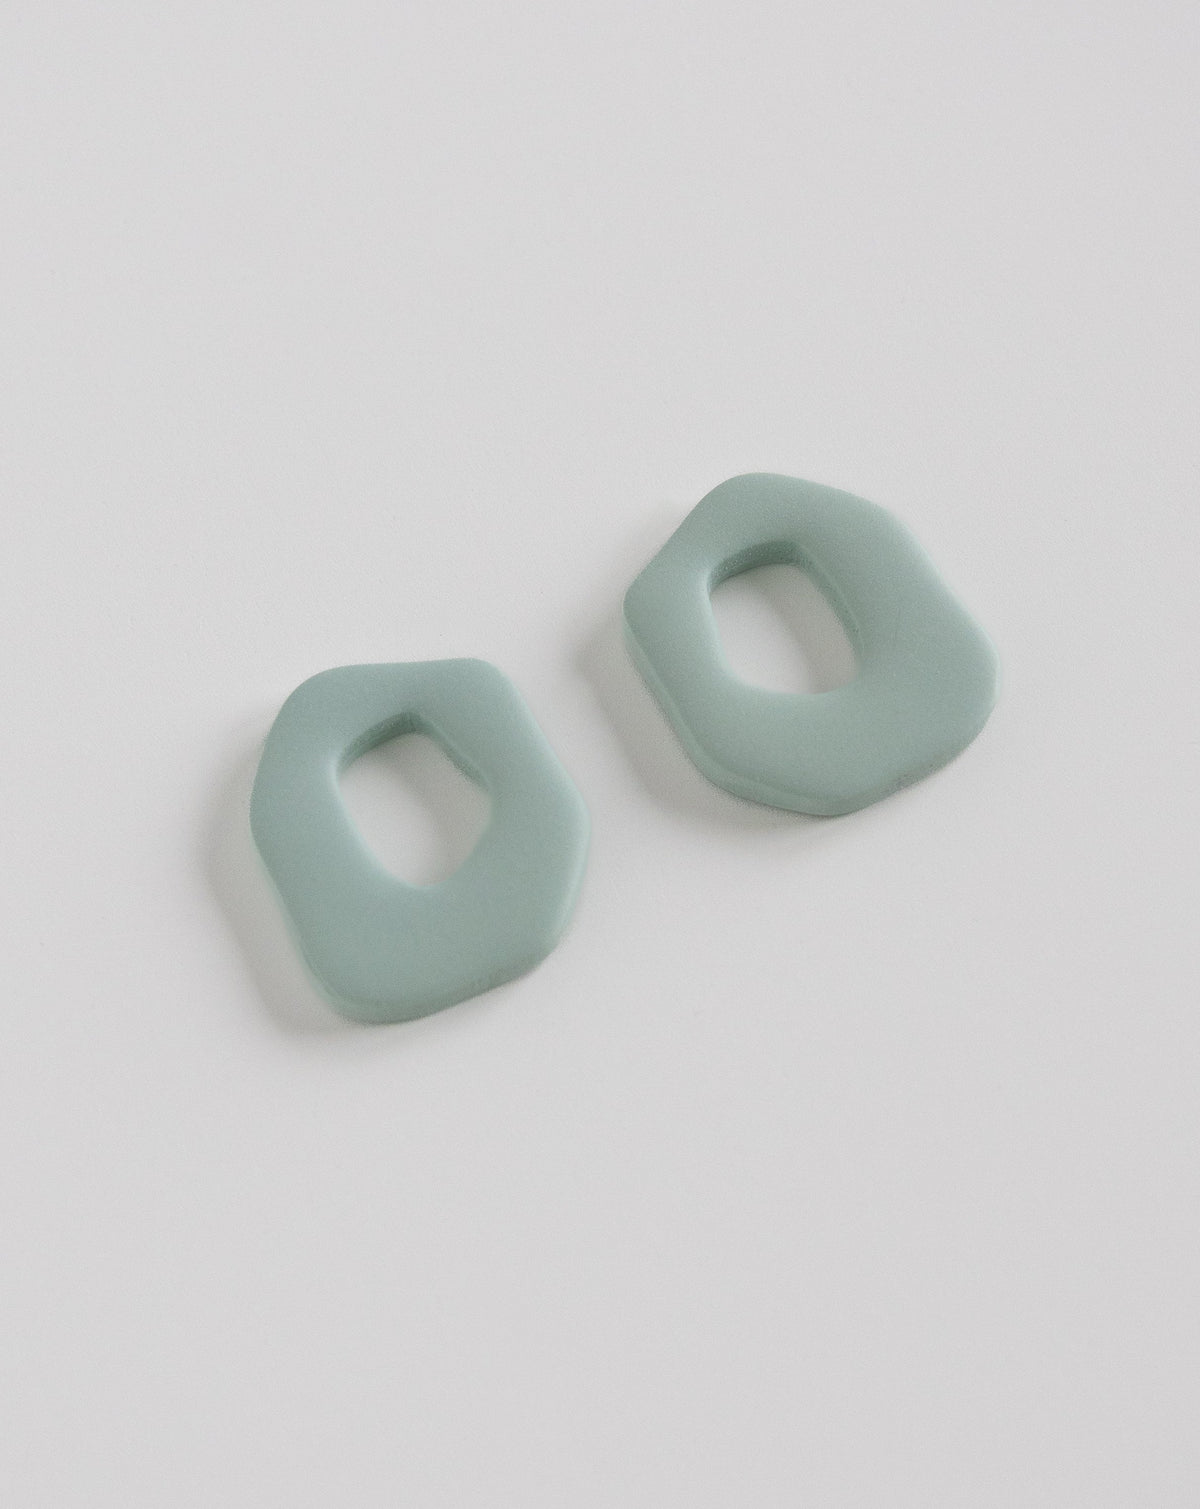 Close up of Darien Beads in Sage color, angled view